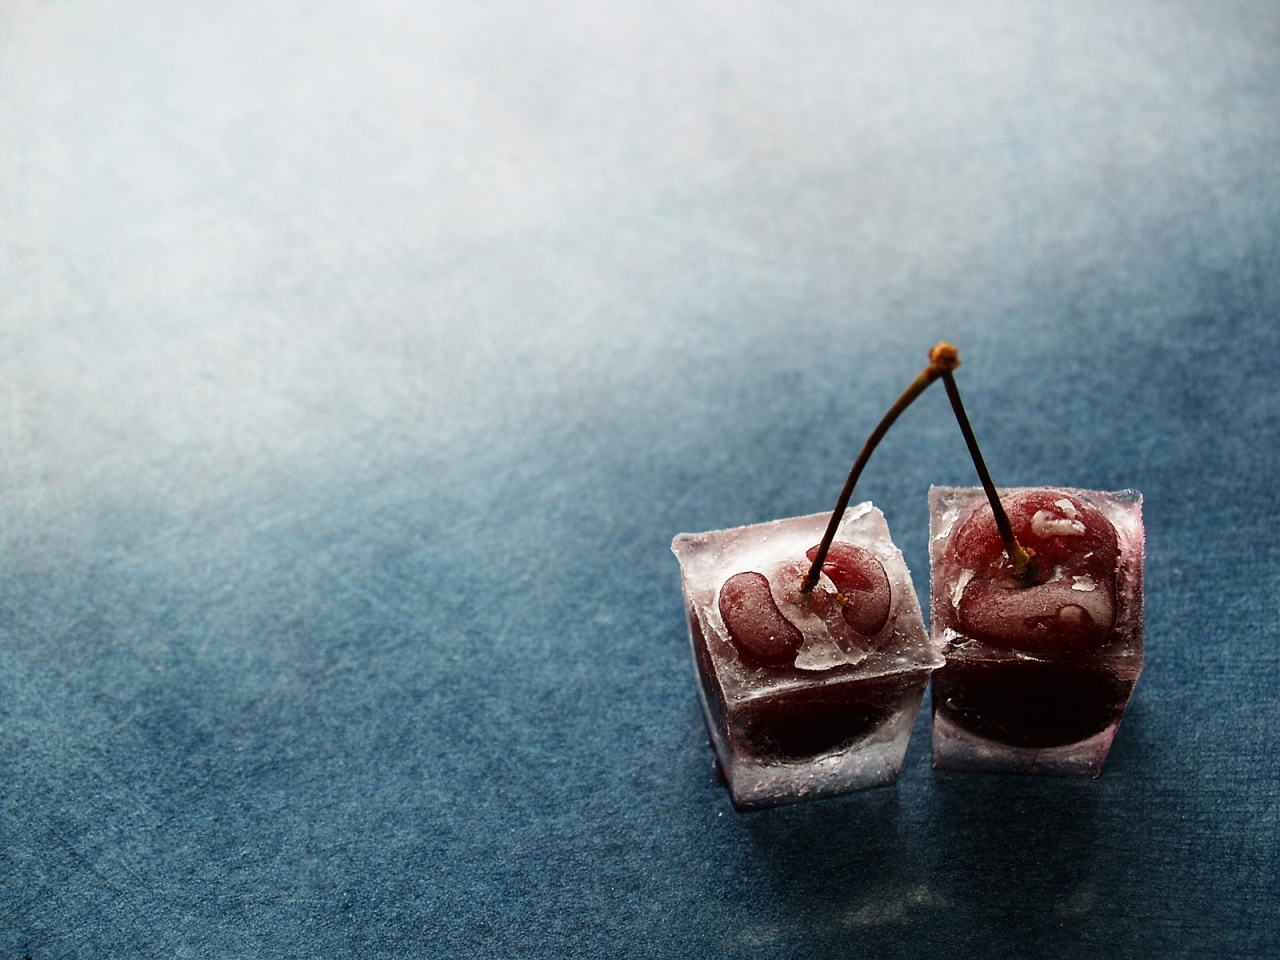 Cherries in Ice for 1280 x 960 resolution